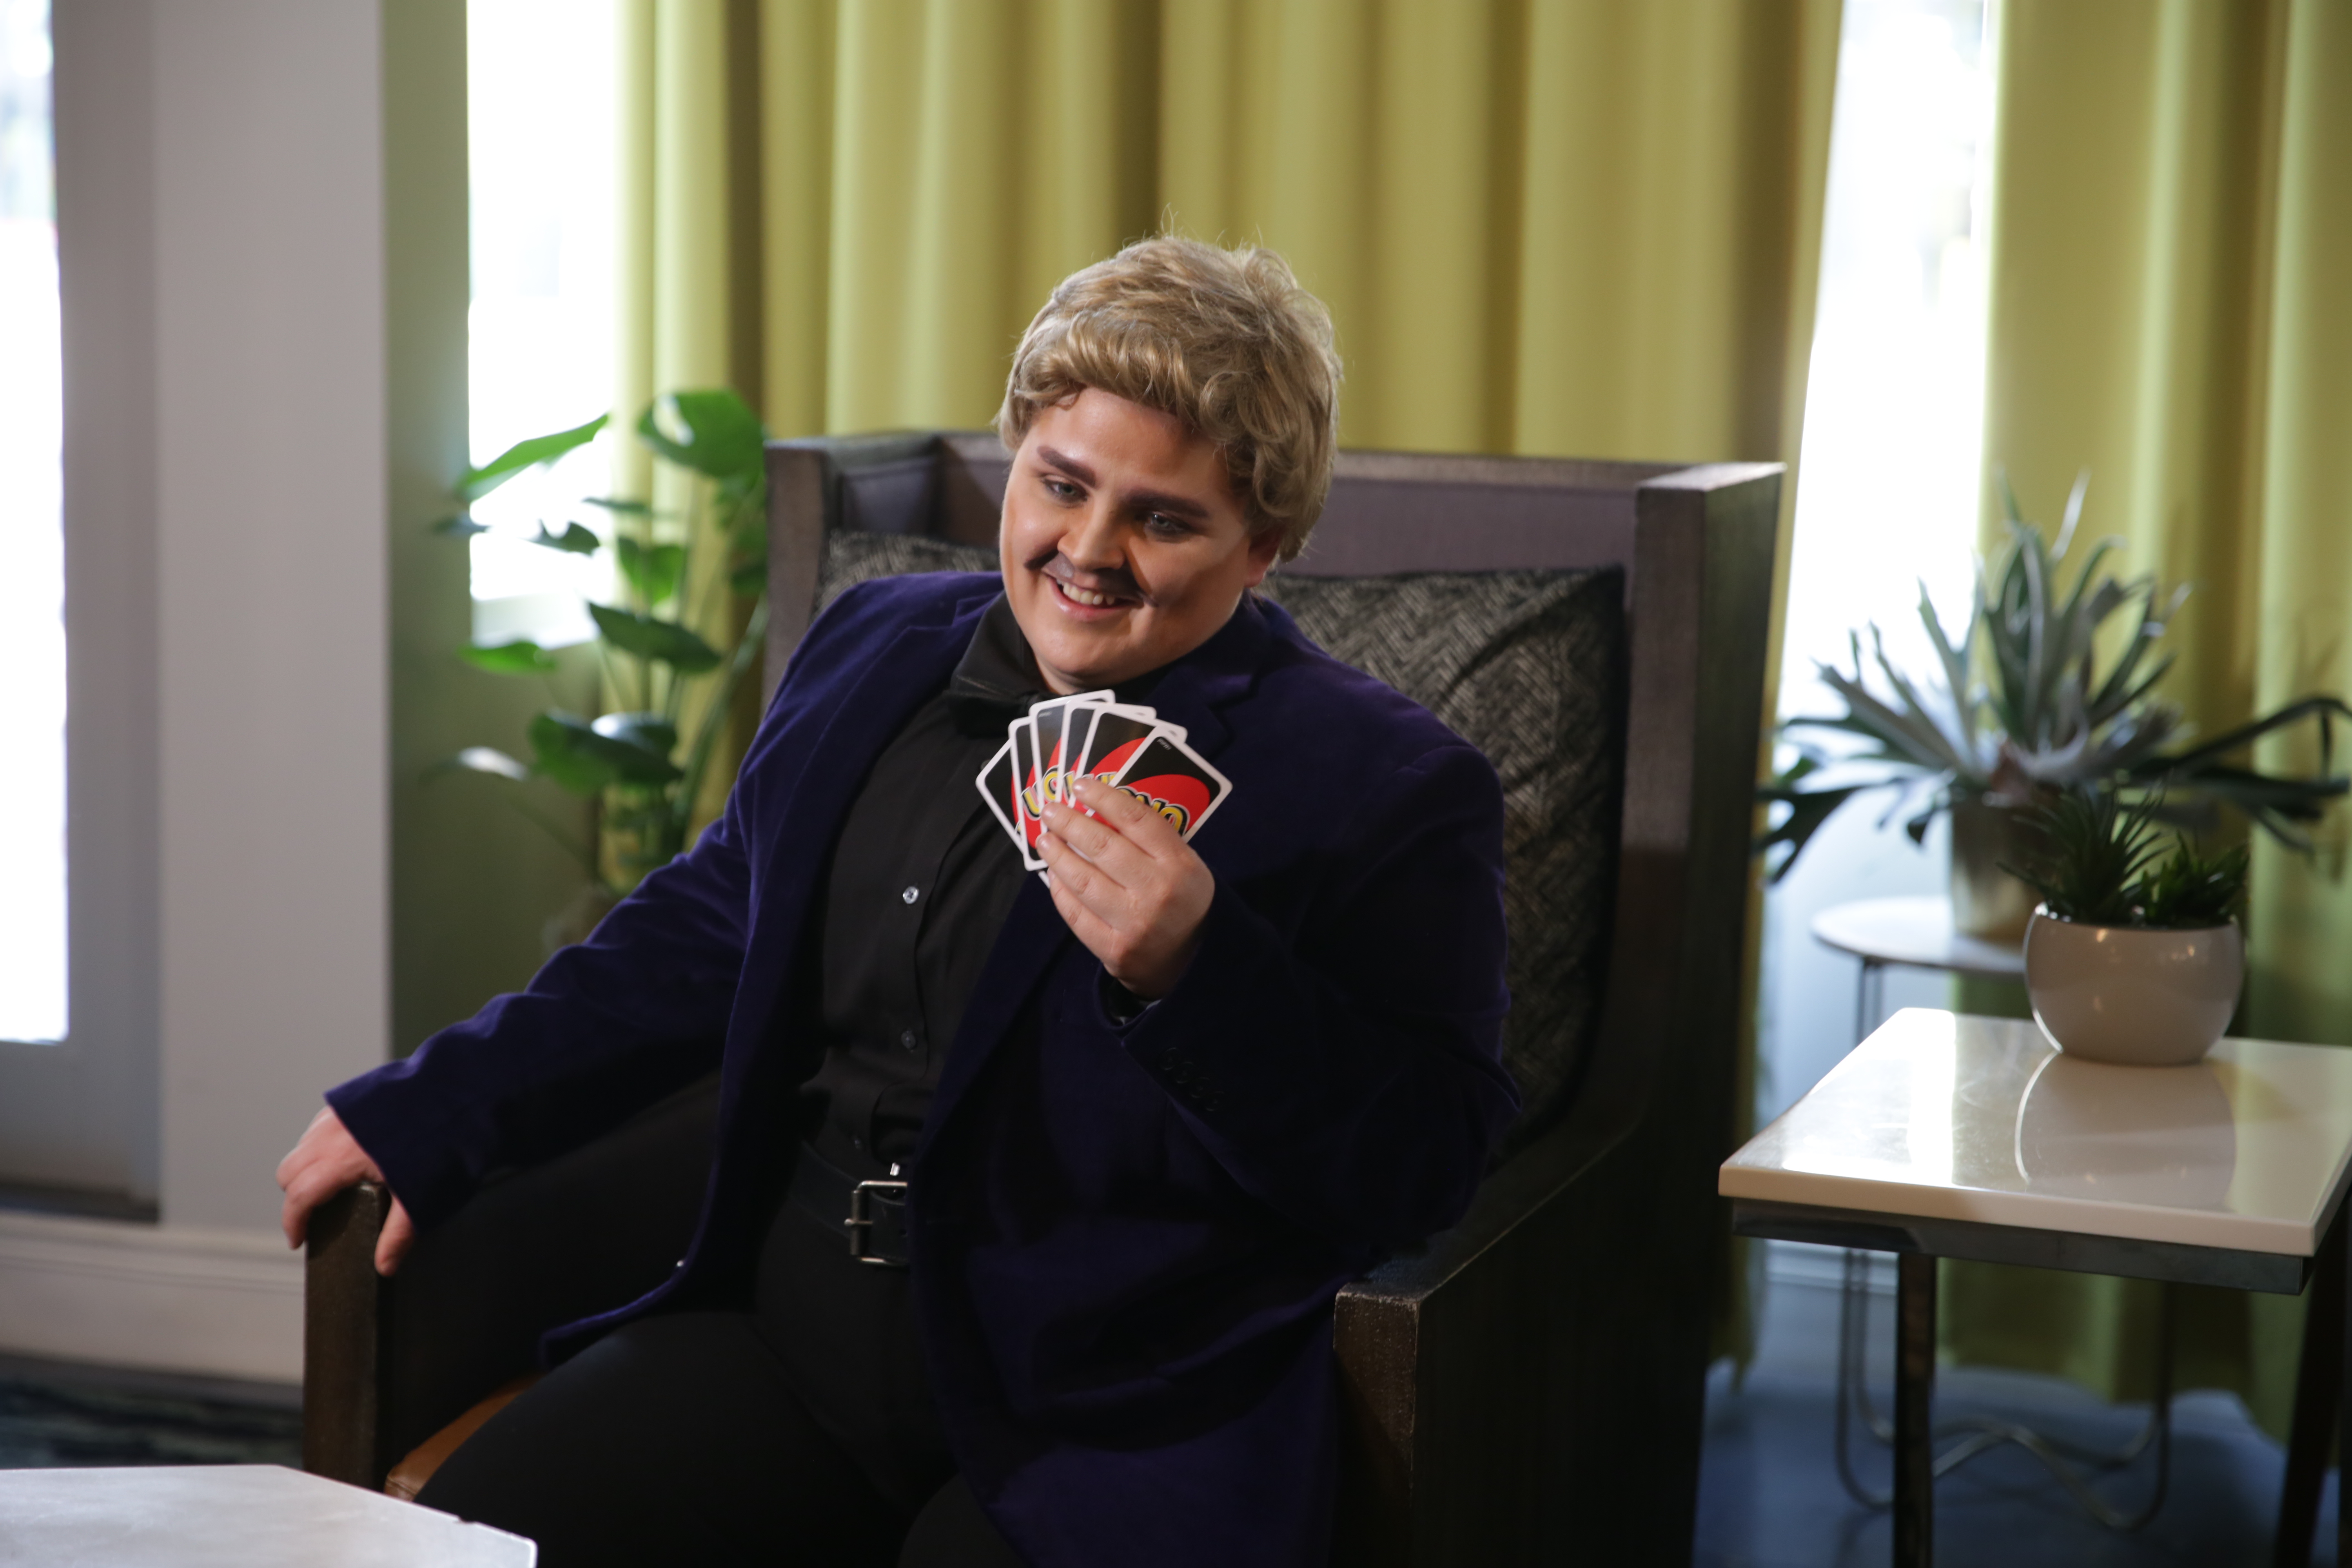 Marty McGuy plays Uno at Hotel Trundle